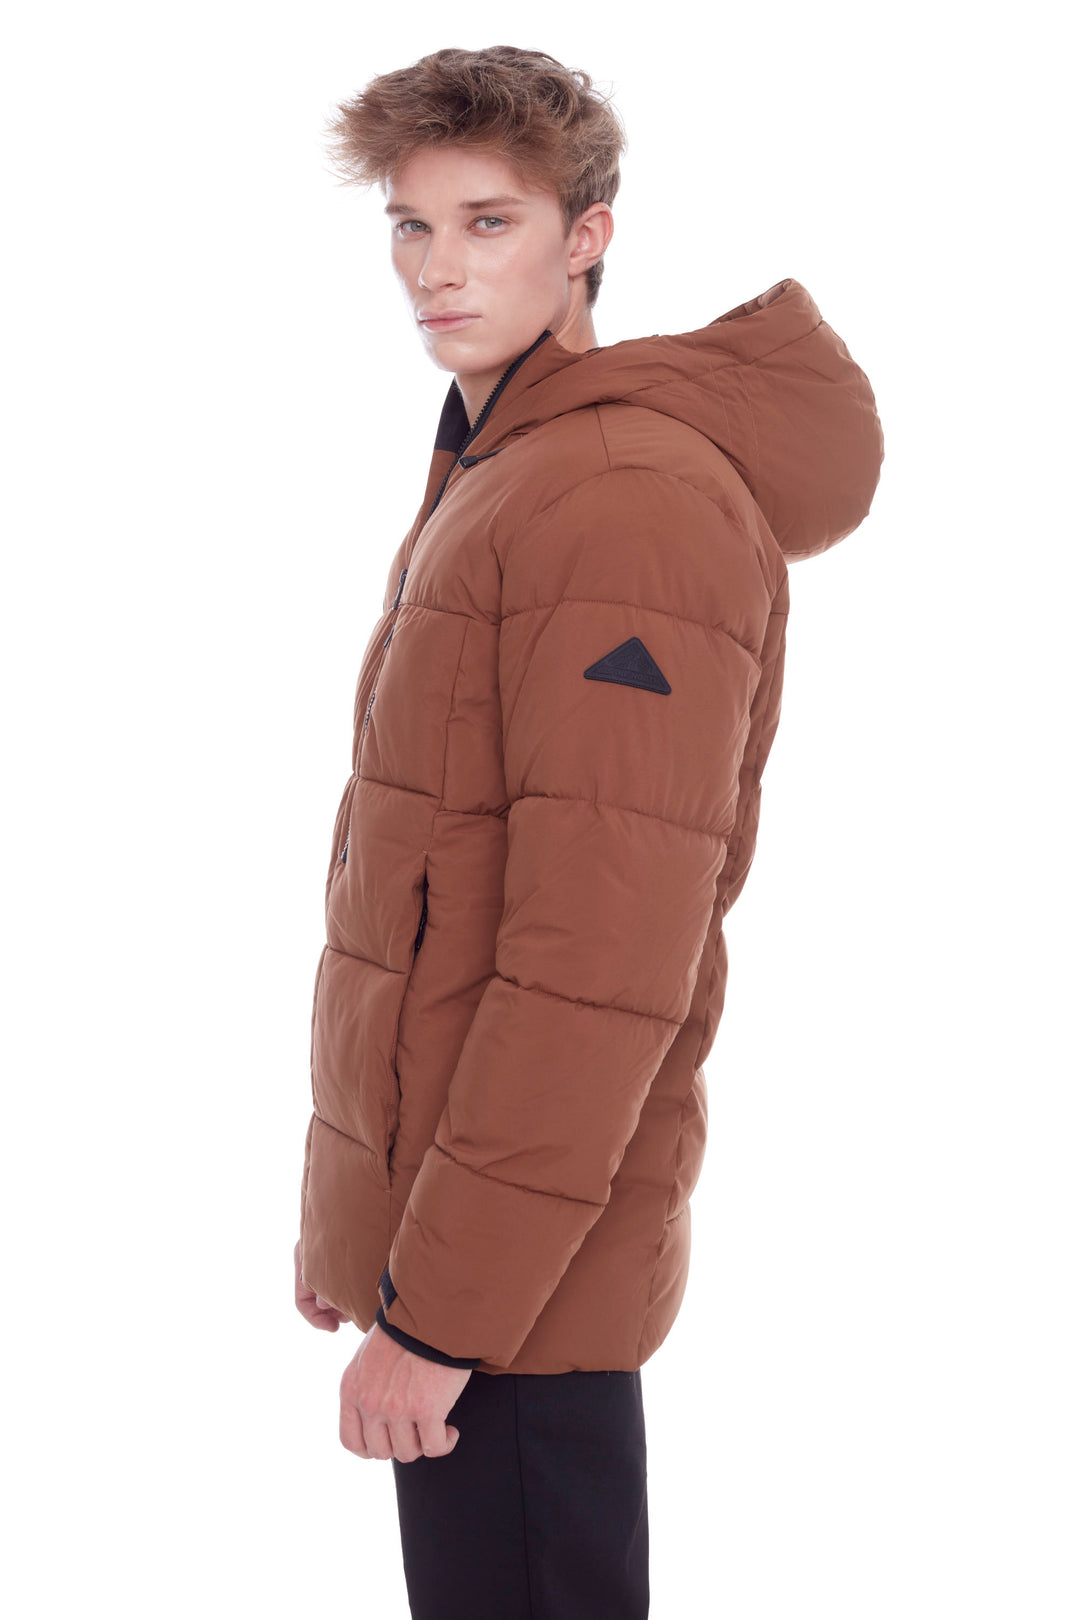 BANFF | MEN'S VEGAN DOWN (RECYCLED) MID-WEIGHT QUILTED PUFFER JACKET, MAPLE